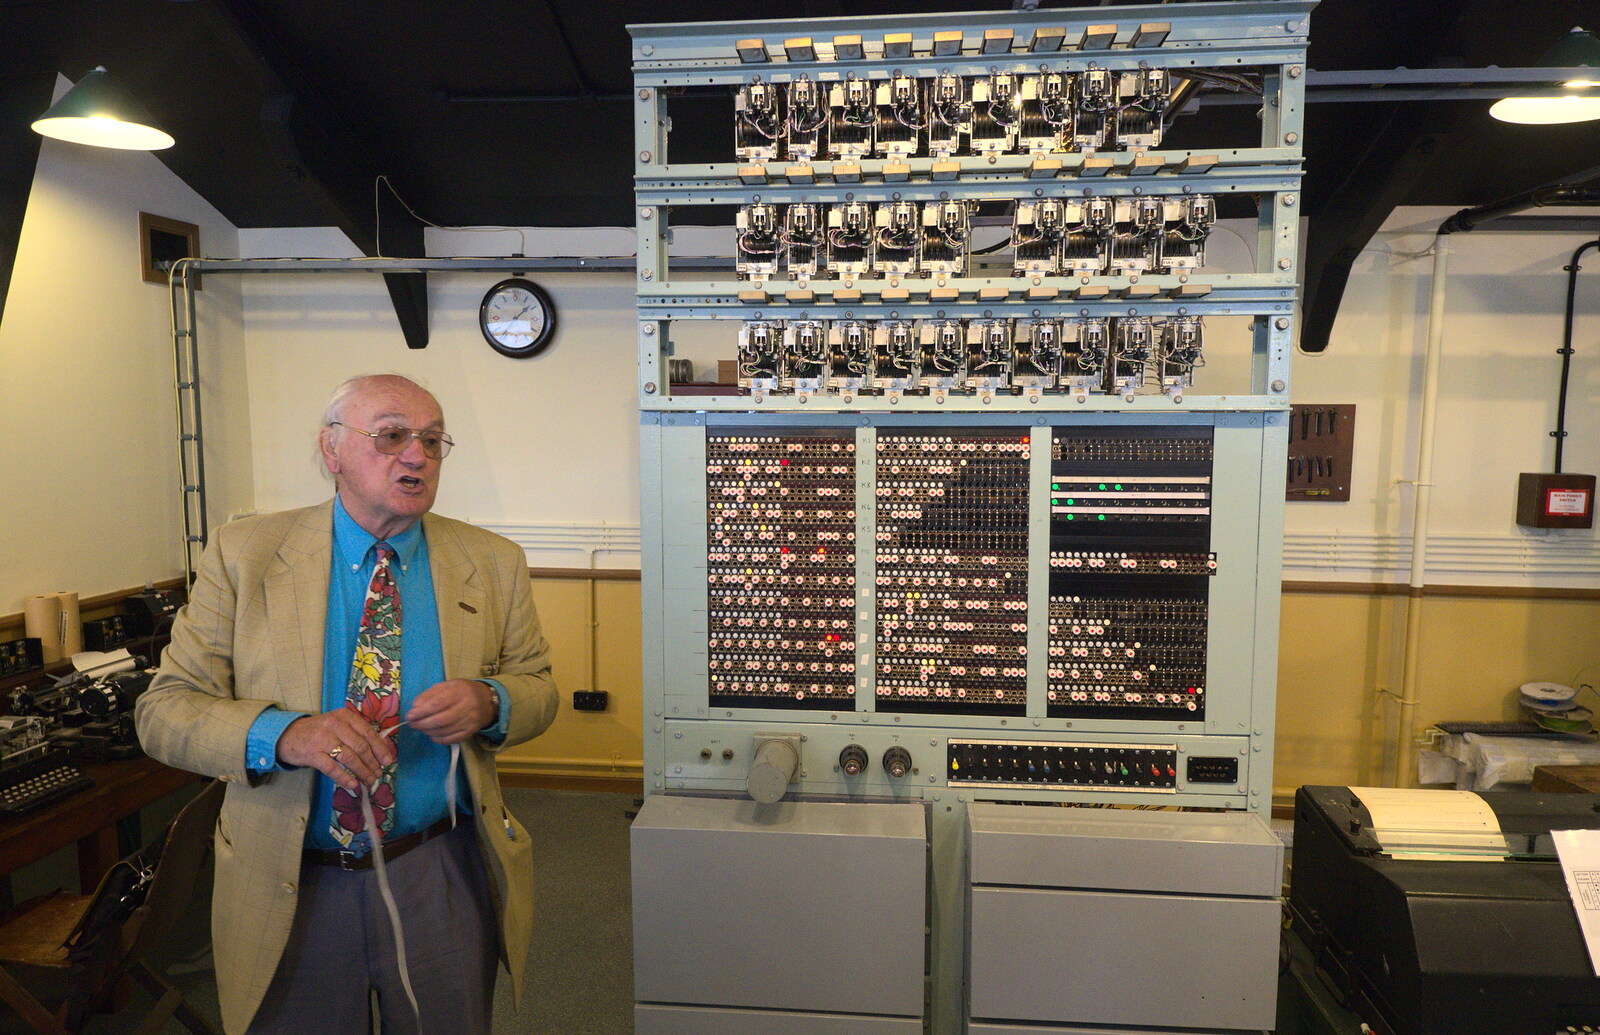 There's an introduction to Colossus from TouchType does Bletchley Park, Bletchley, Bedfordshire - 20th July 2012